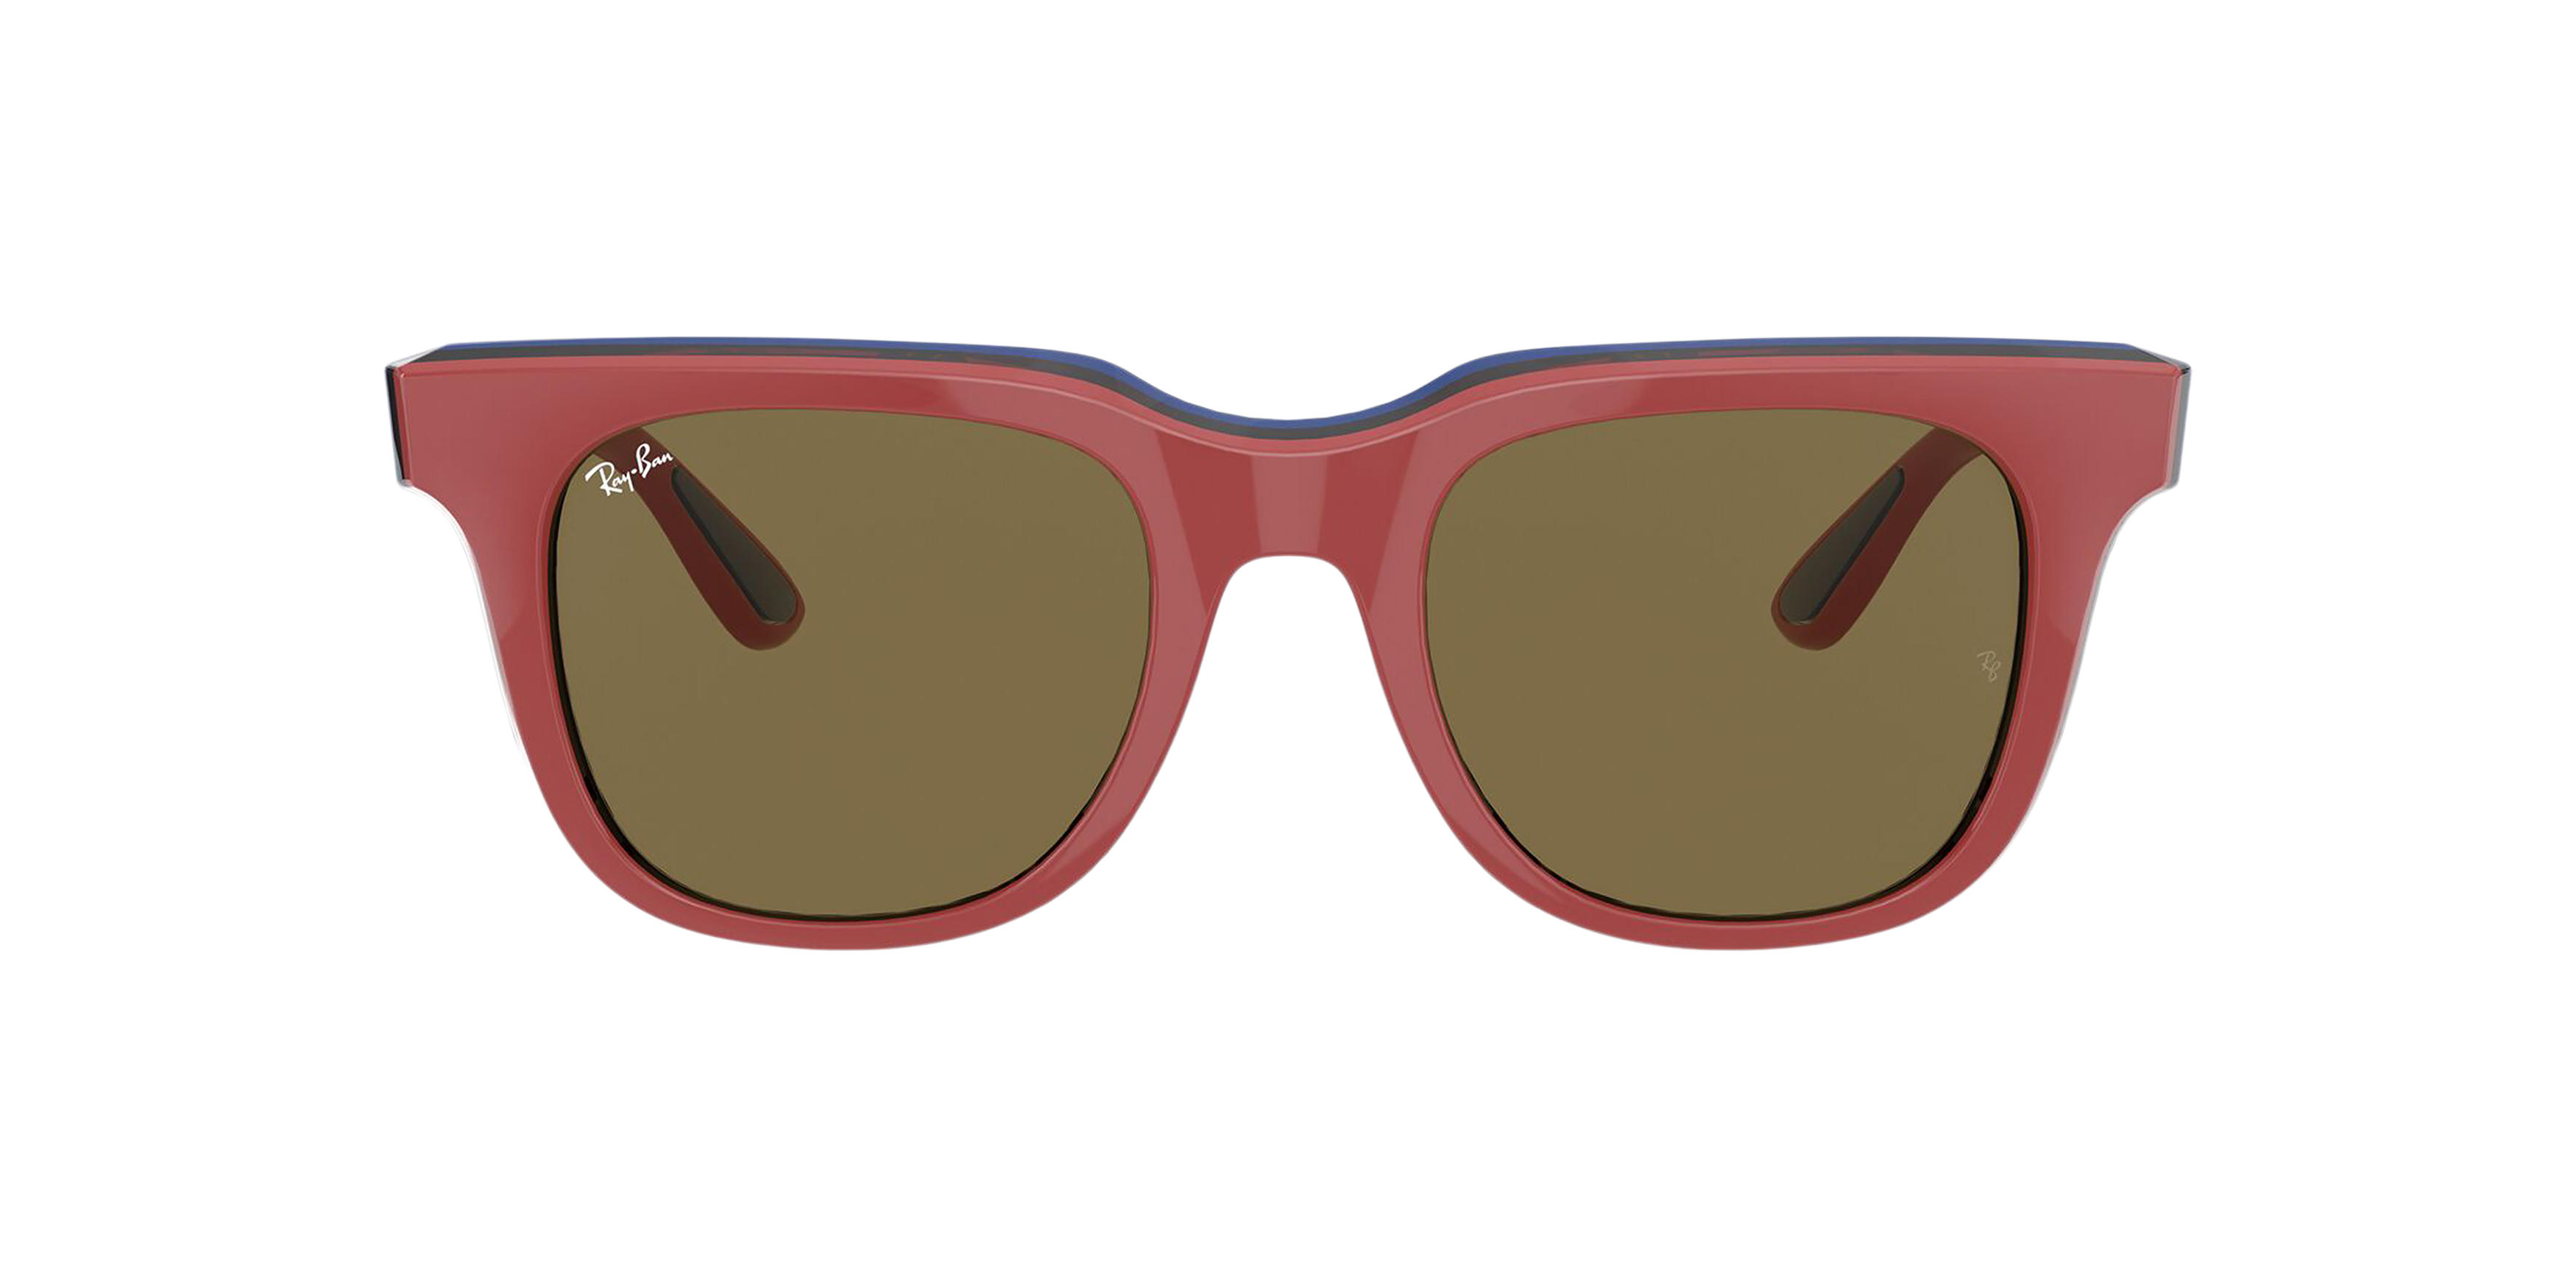 [products.image.front] Ray-Ban RB4368 652273